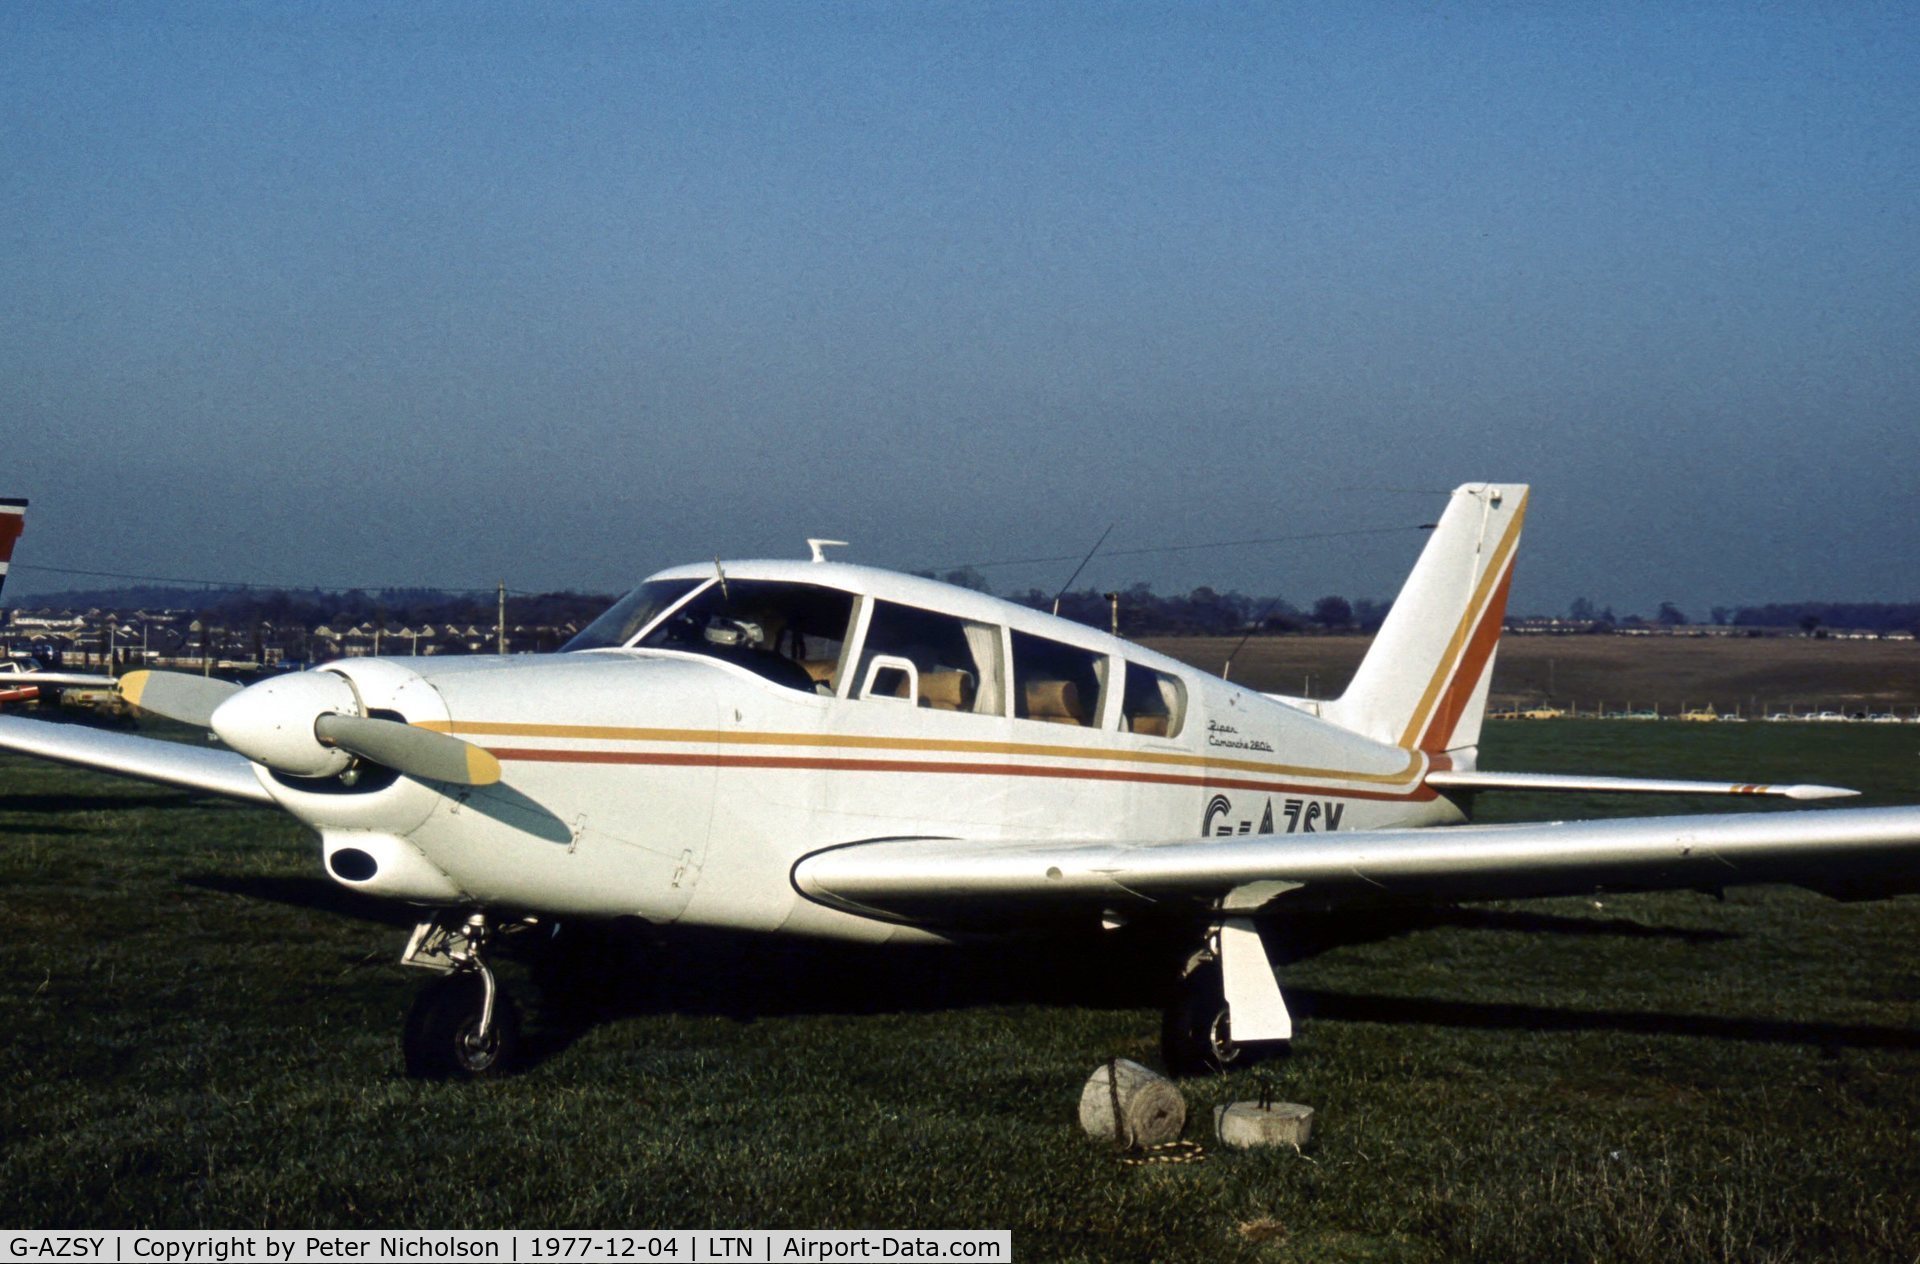 G-AZSY, 1966 Piper PA-24-260 Comanche B C/N 24-4438, This Comanche was seen at Luton in December 1977.